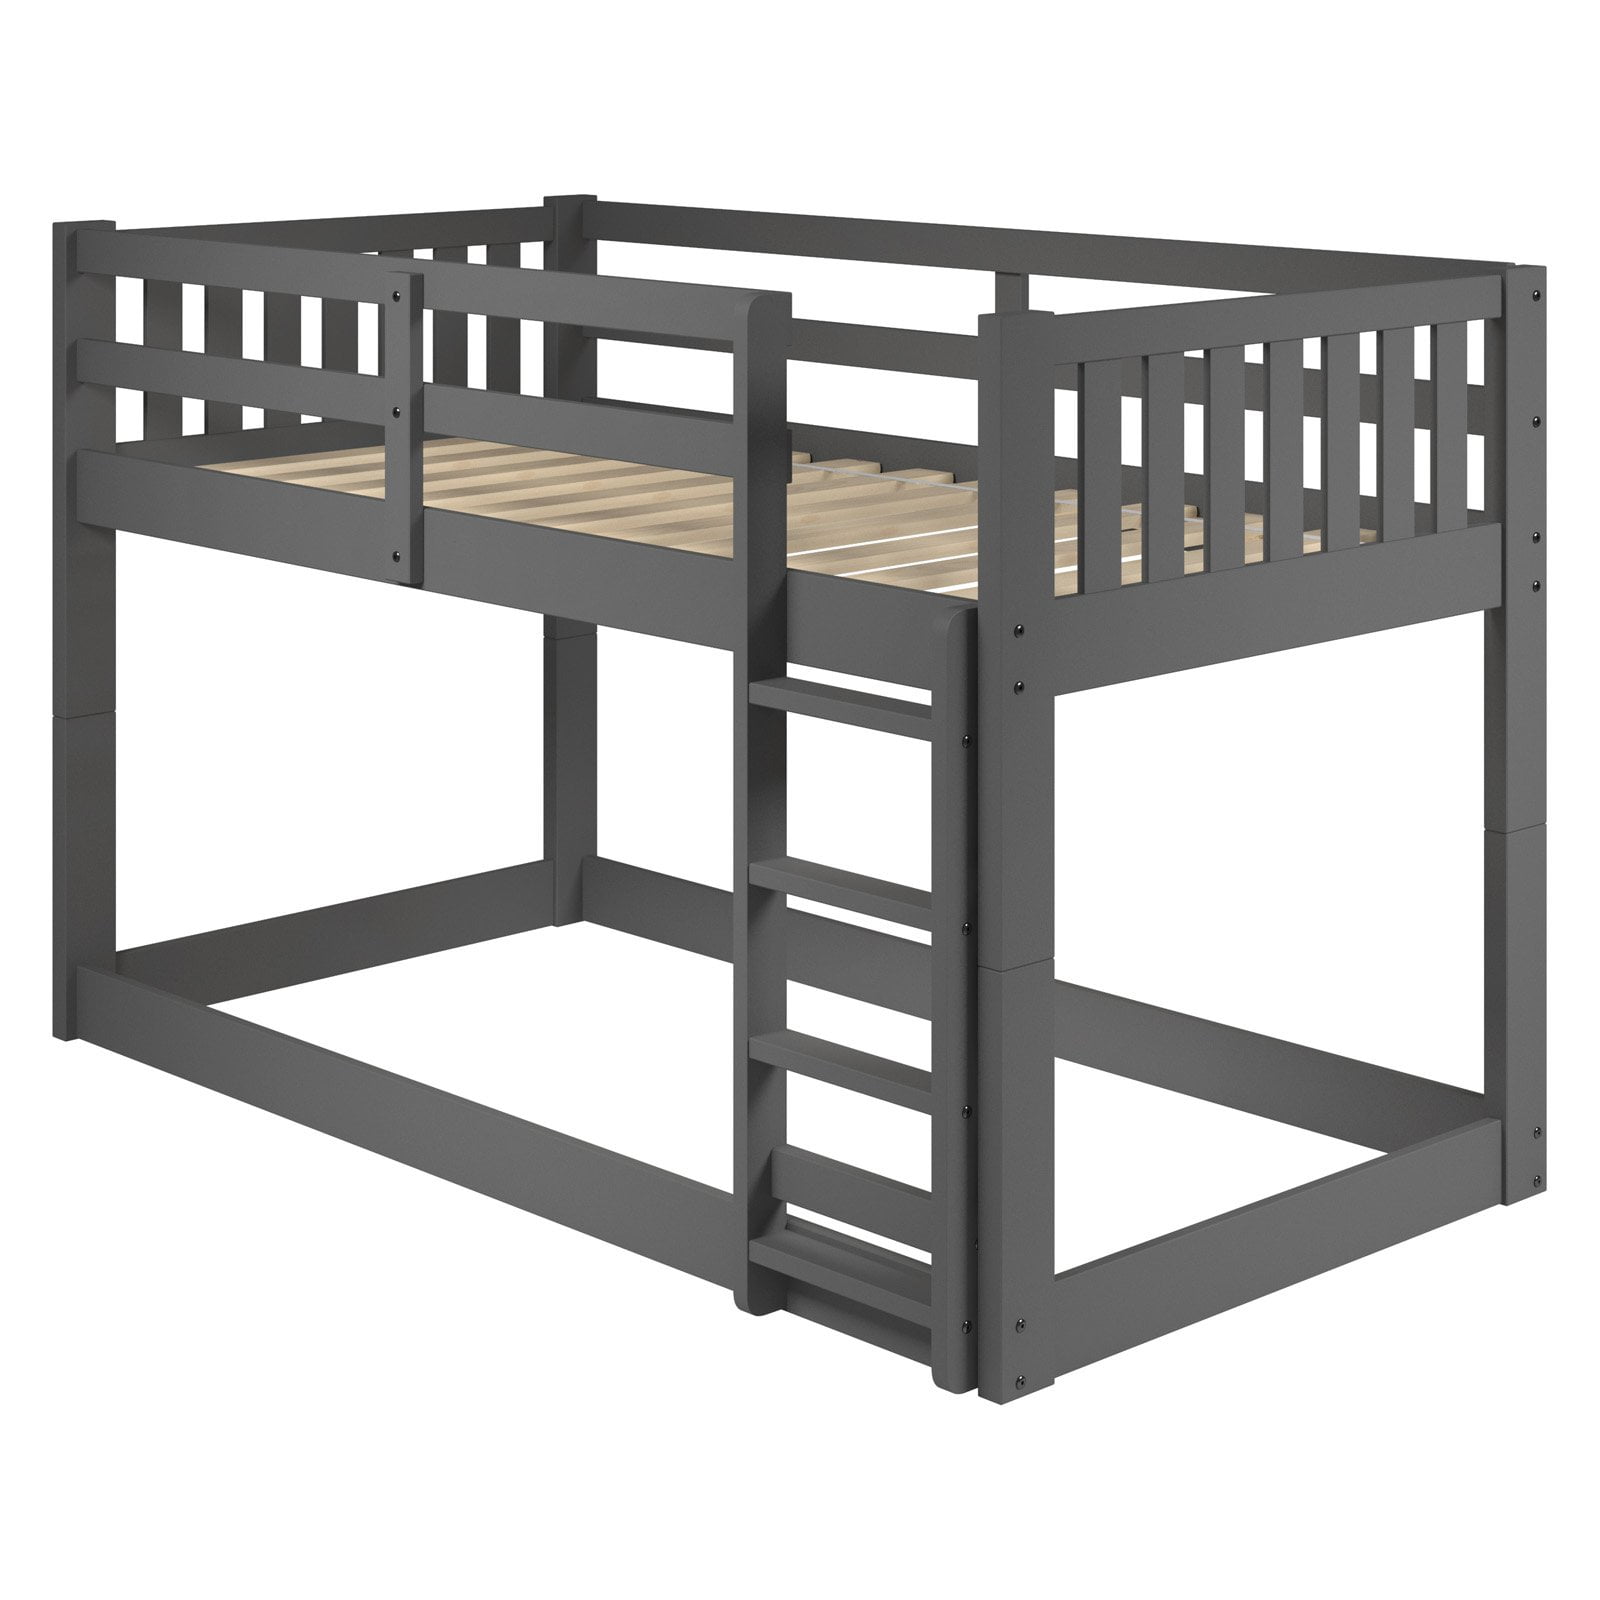 Woodcrest Low Platform Twin Over, Weight Limit For Top Bunk Bed